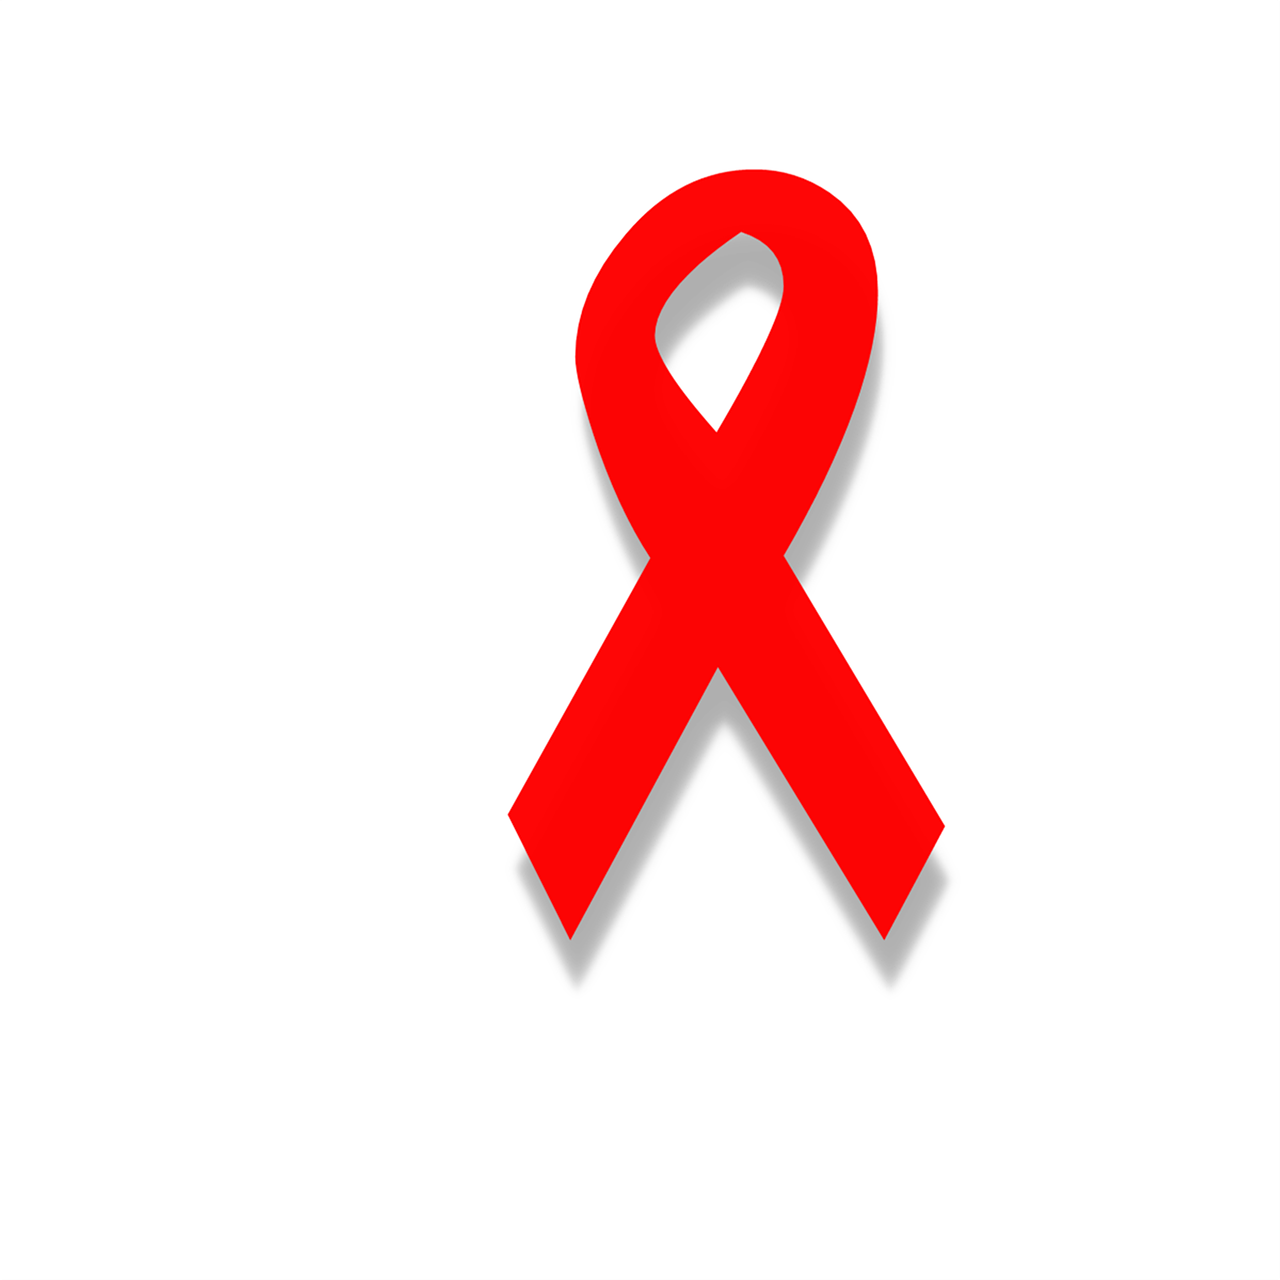 What does the Red Ribbon used for World AIDS Day mean?